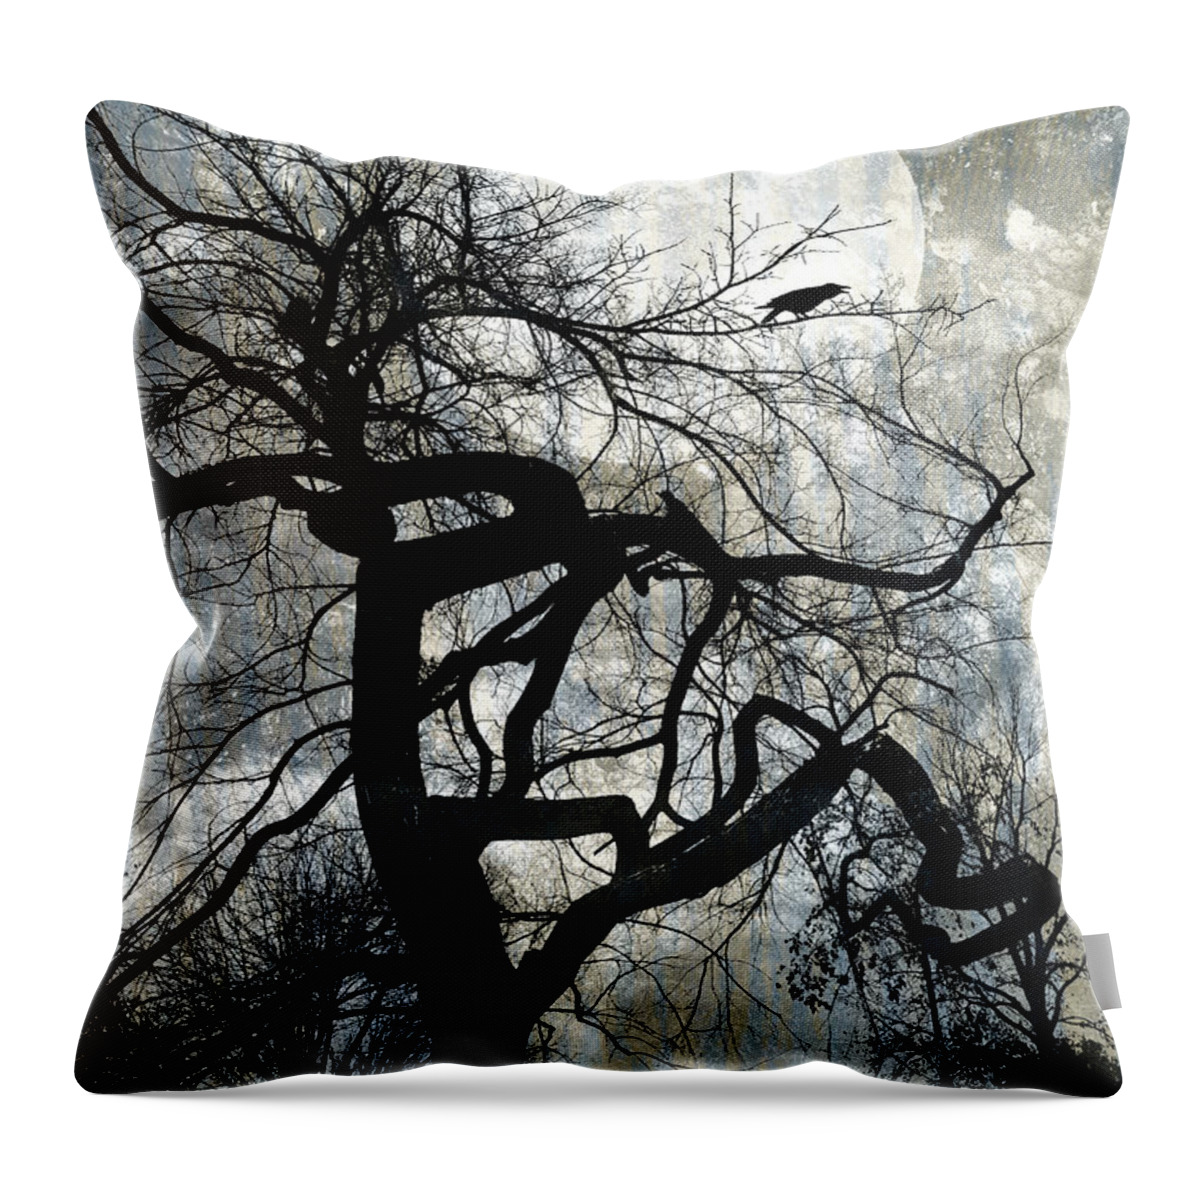 Gothic Moon Throw Pillow by Ann Powell - Pixels